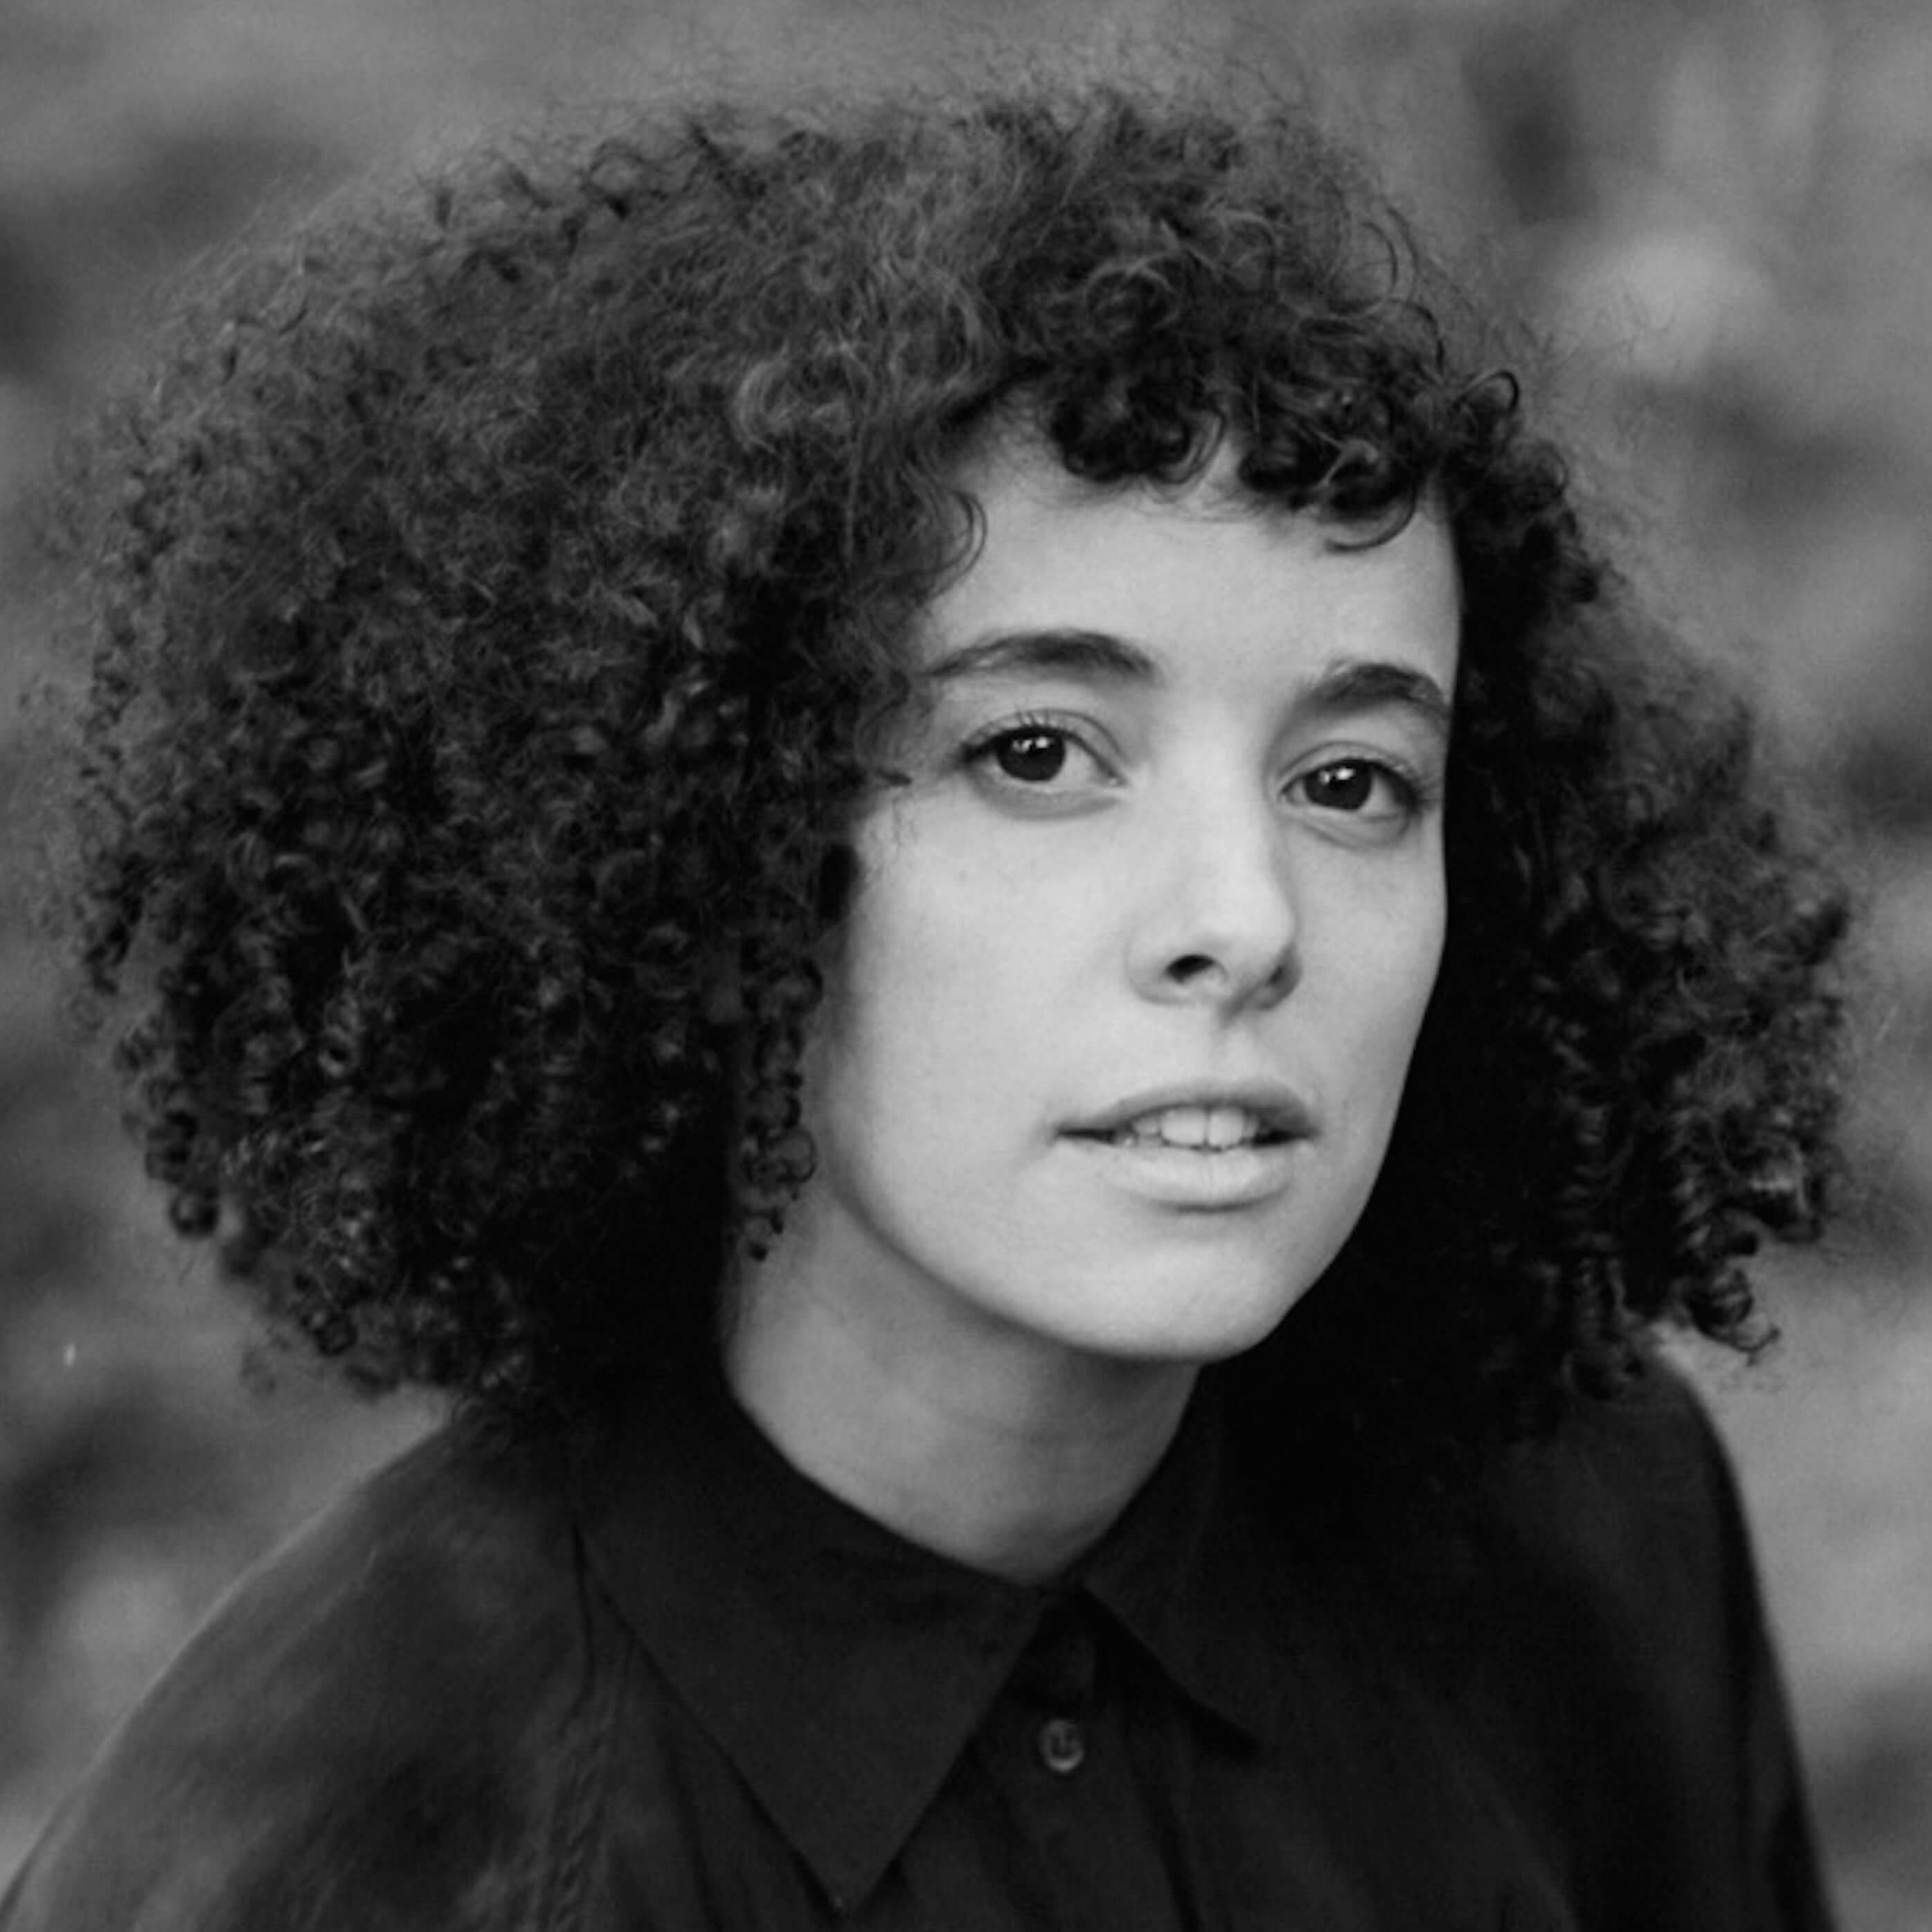 Malika Zouhali-Worrall looking straight ahead. She has dark, curly, shoulder-length hair and short bangs. Black and white portrait, with out of focus background.